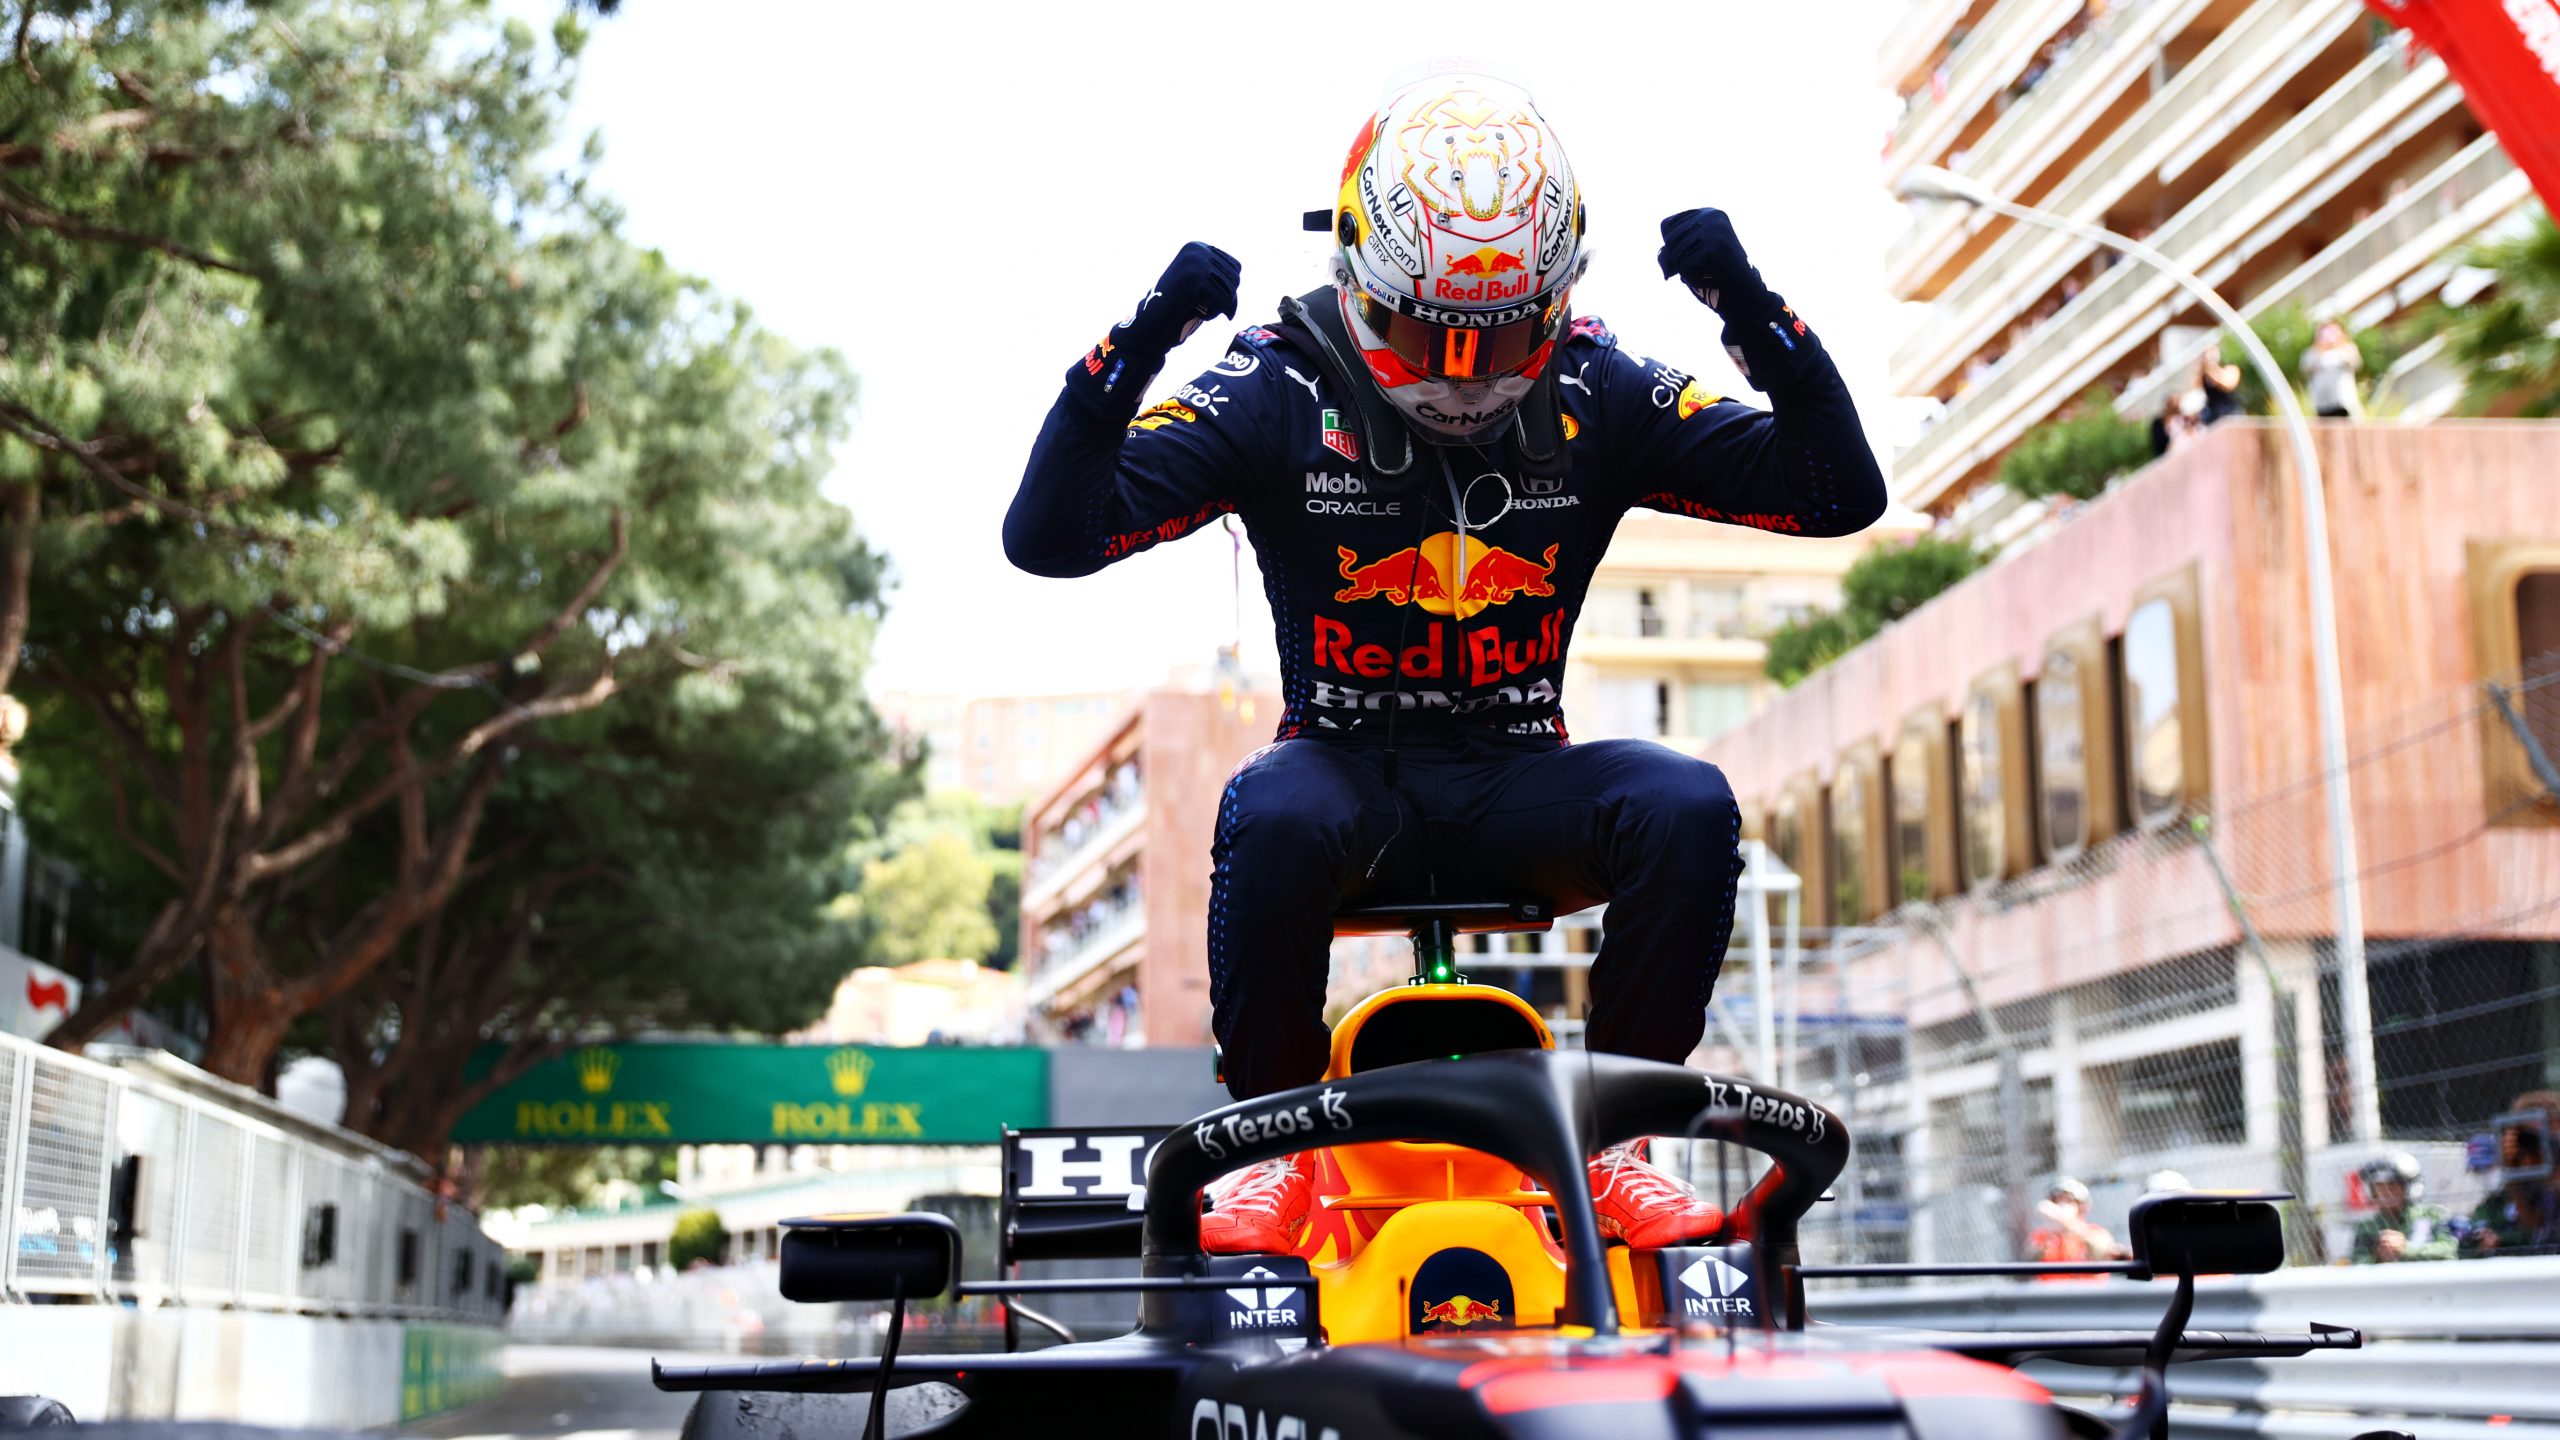 Max Verstappen sits on his Red Bull Formula 1 car after winning a race